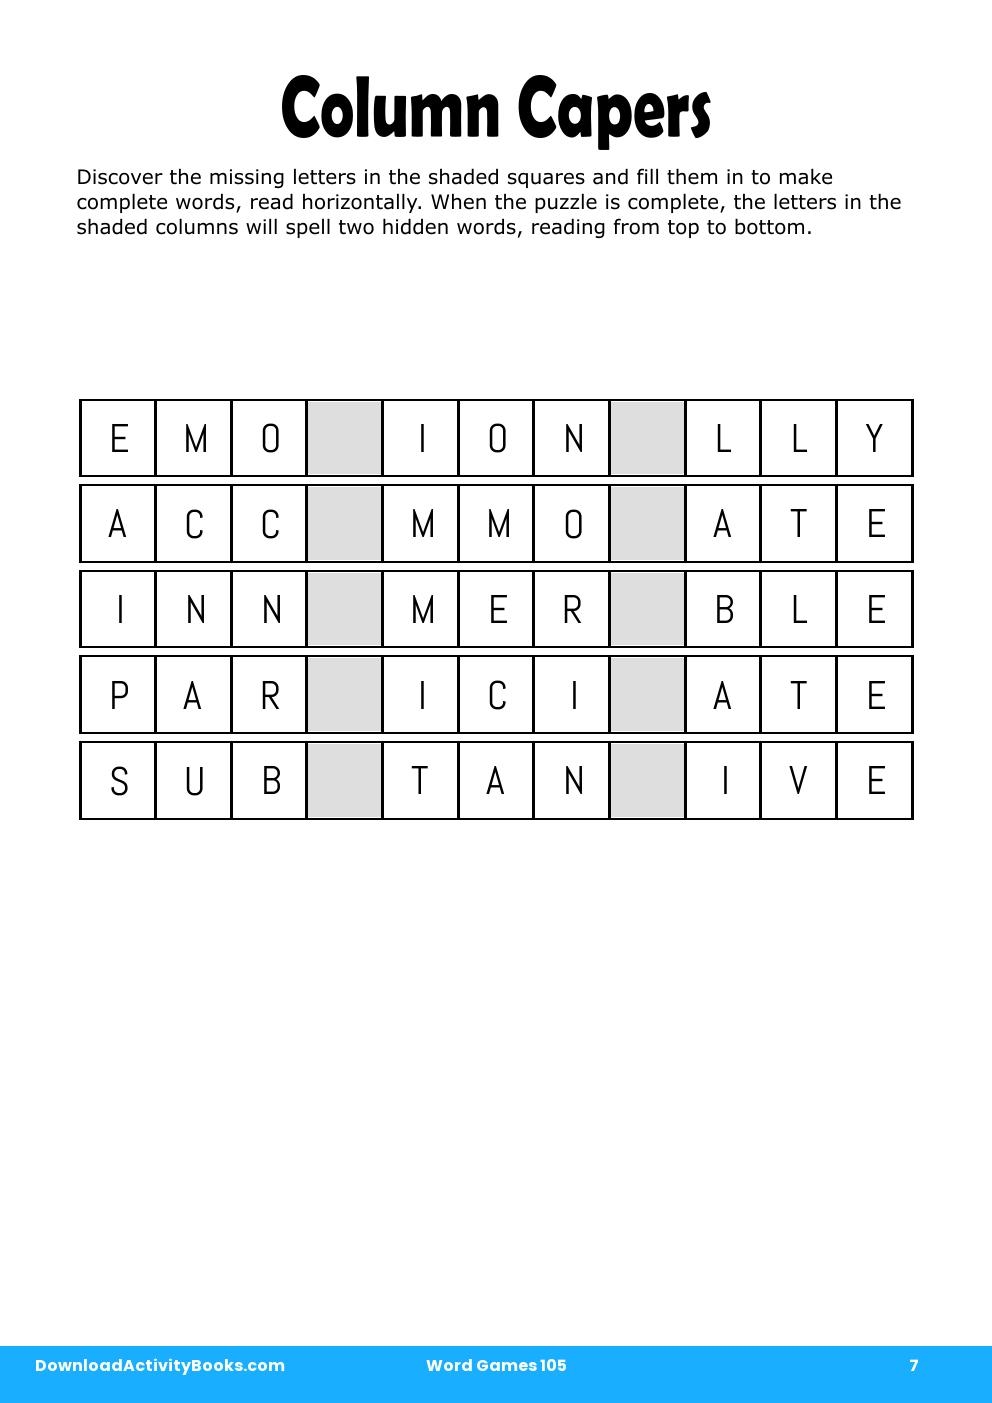 Column Capers in Word Games 105